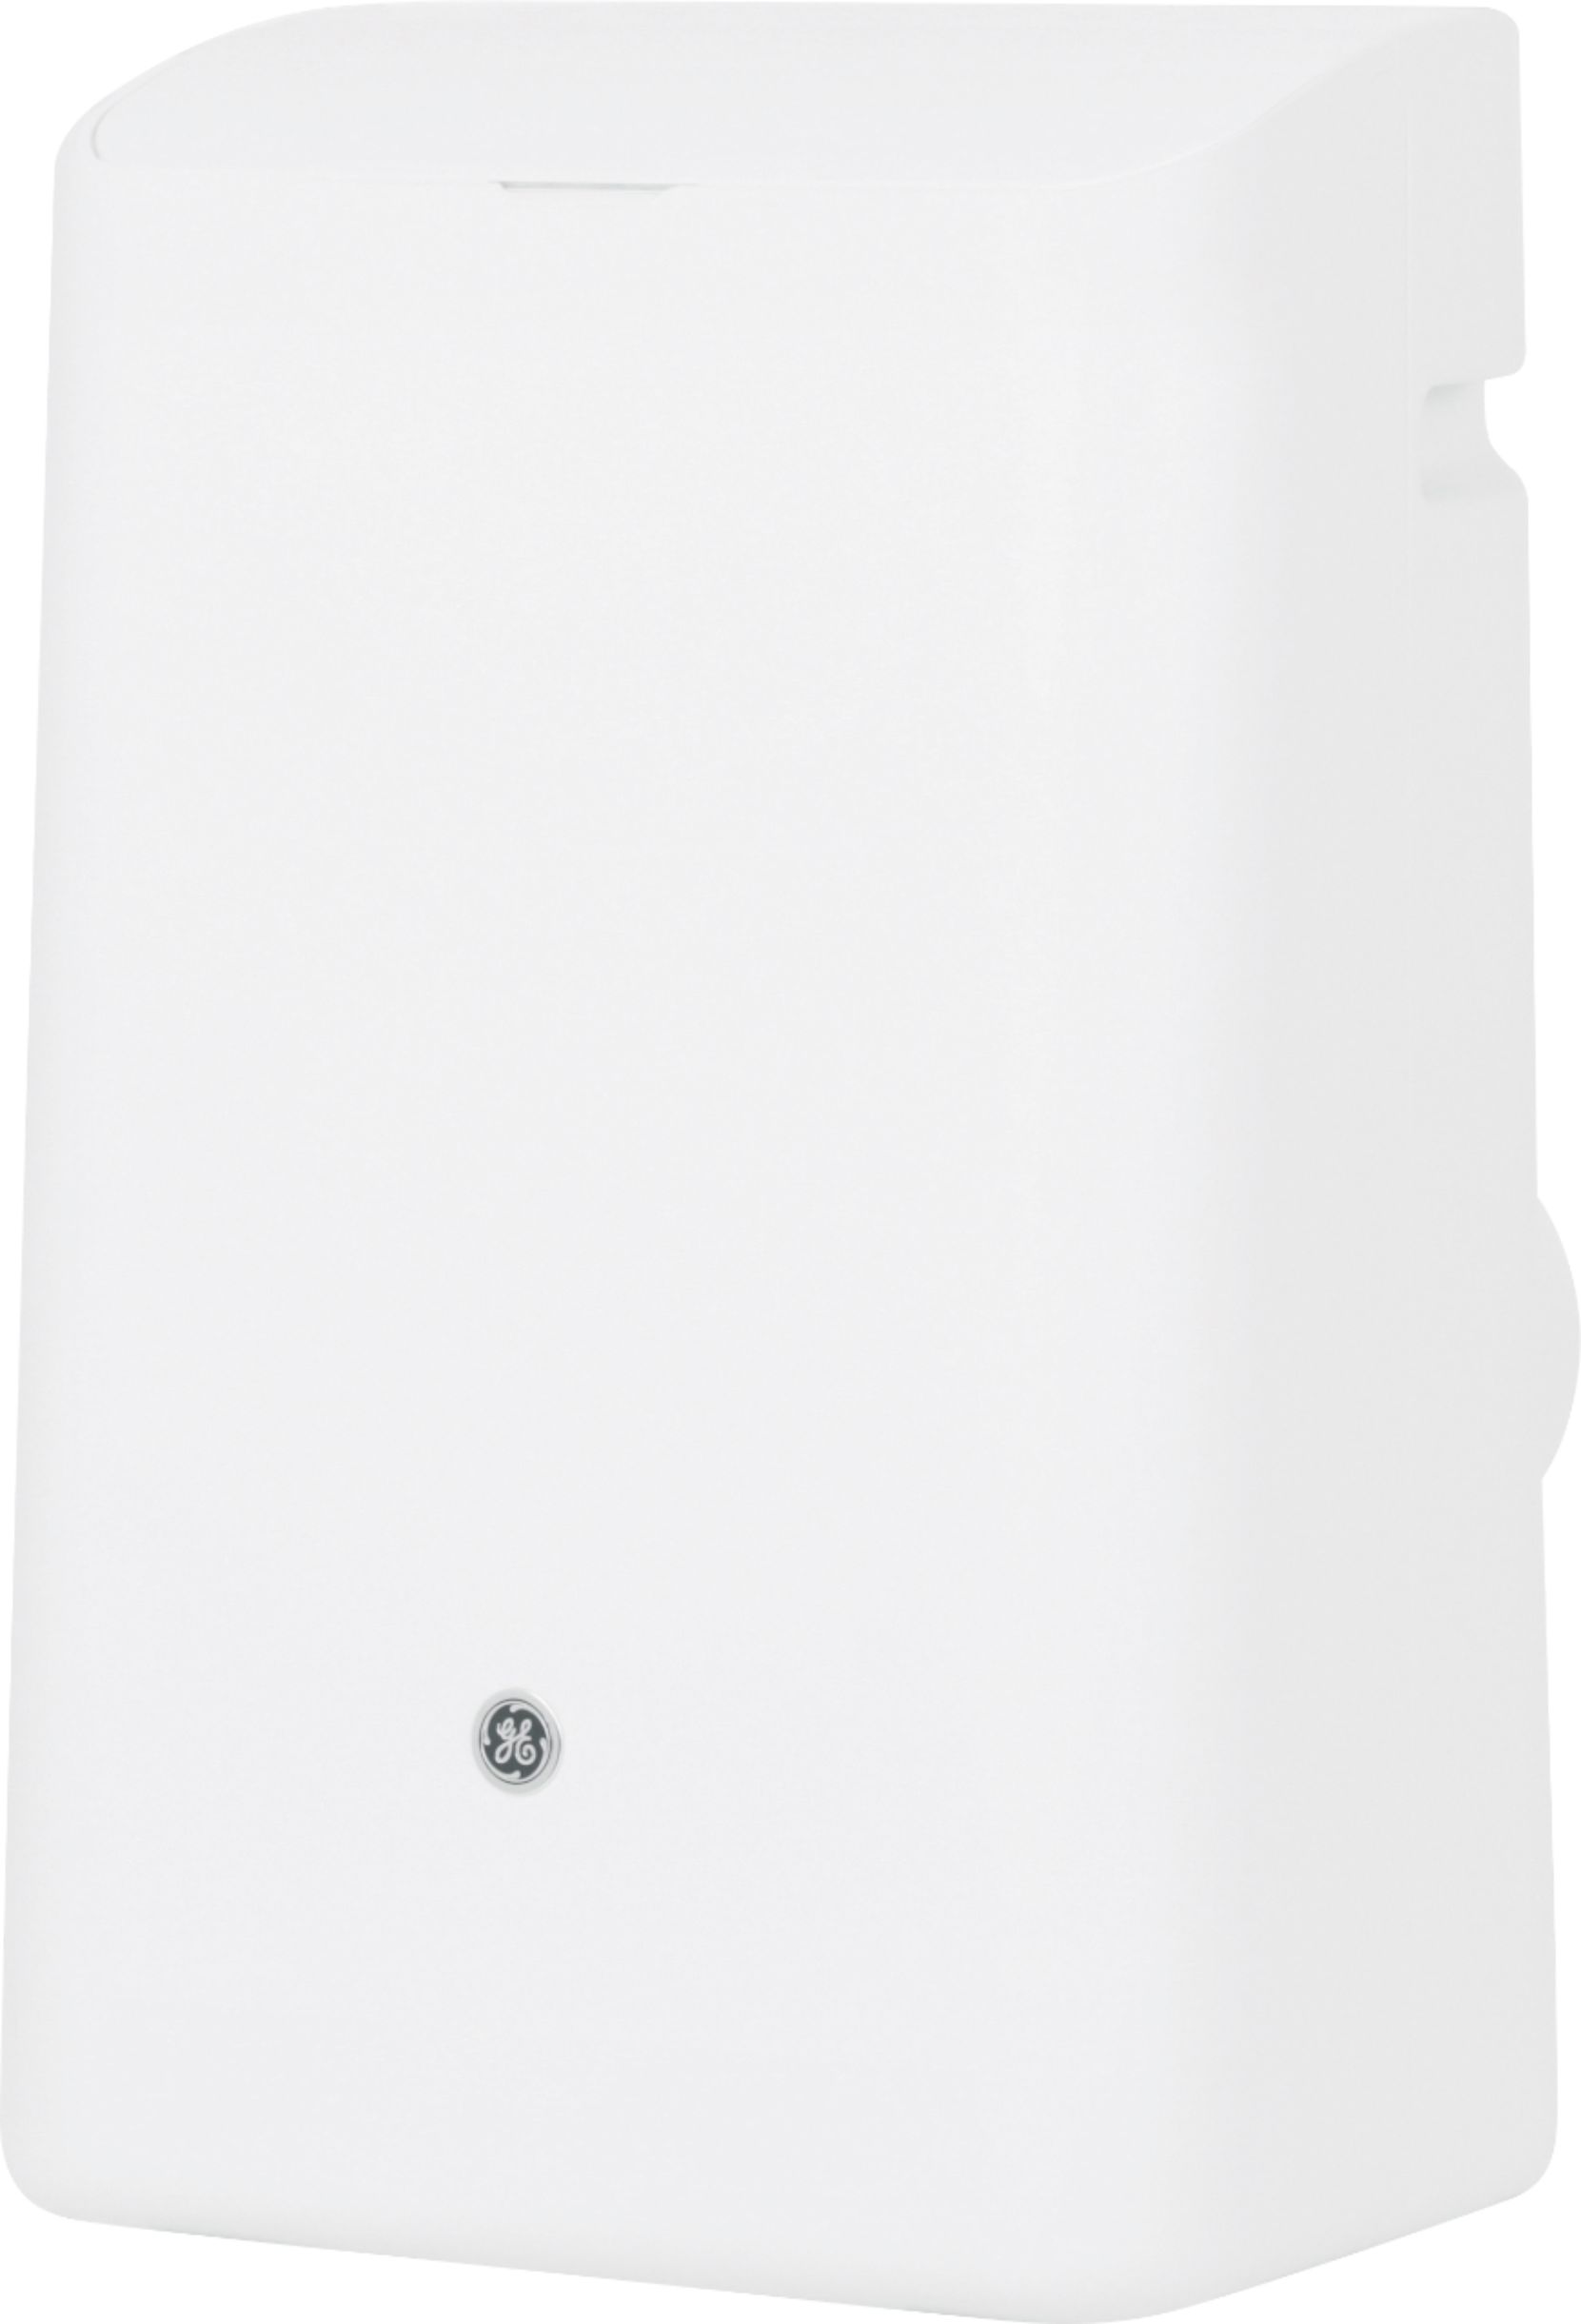 Left View: GE - 250 Sq. Ft. Portable Air Conditioner - White